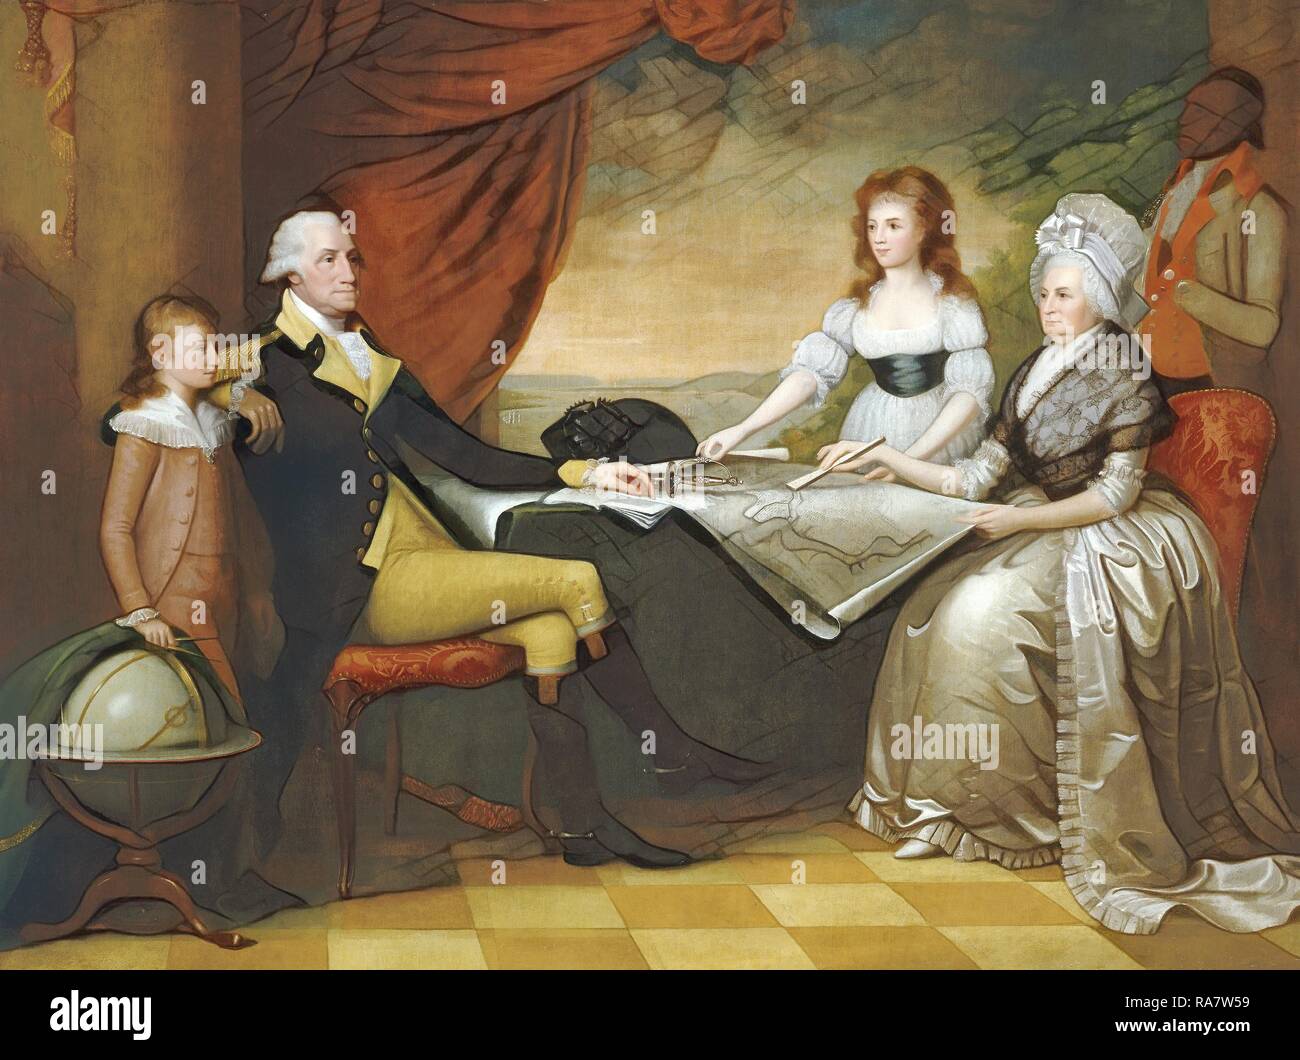 Edward Savage (American, 1761 - 1817), The Washington Family, 1789-1796, oil on canvas. Reimagined by Gibon. Classic reimagined Stock Photo